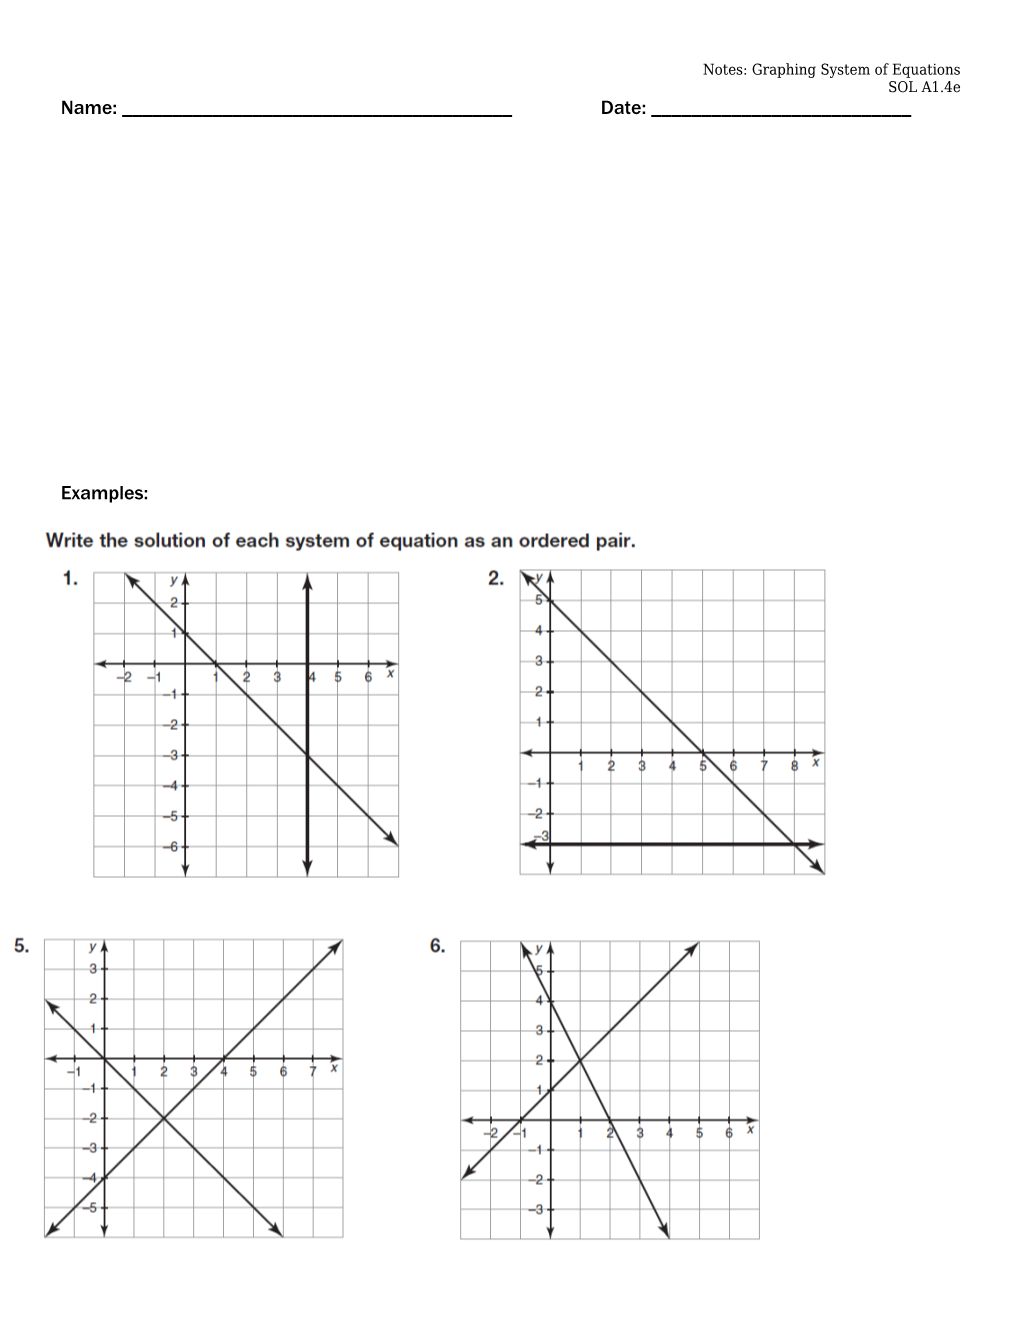 Notes: Graphing System of Equations